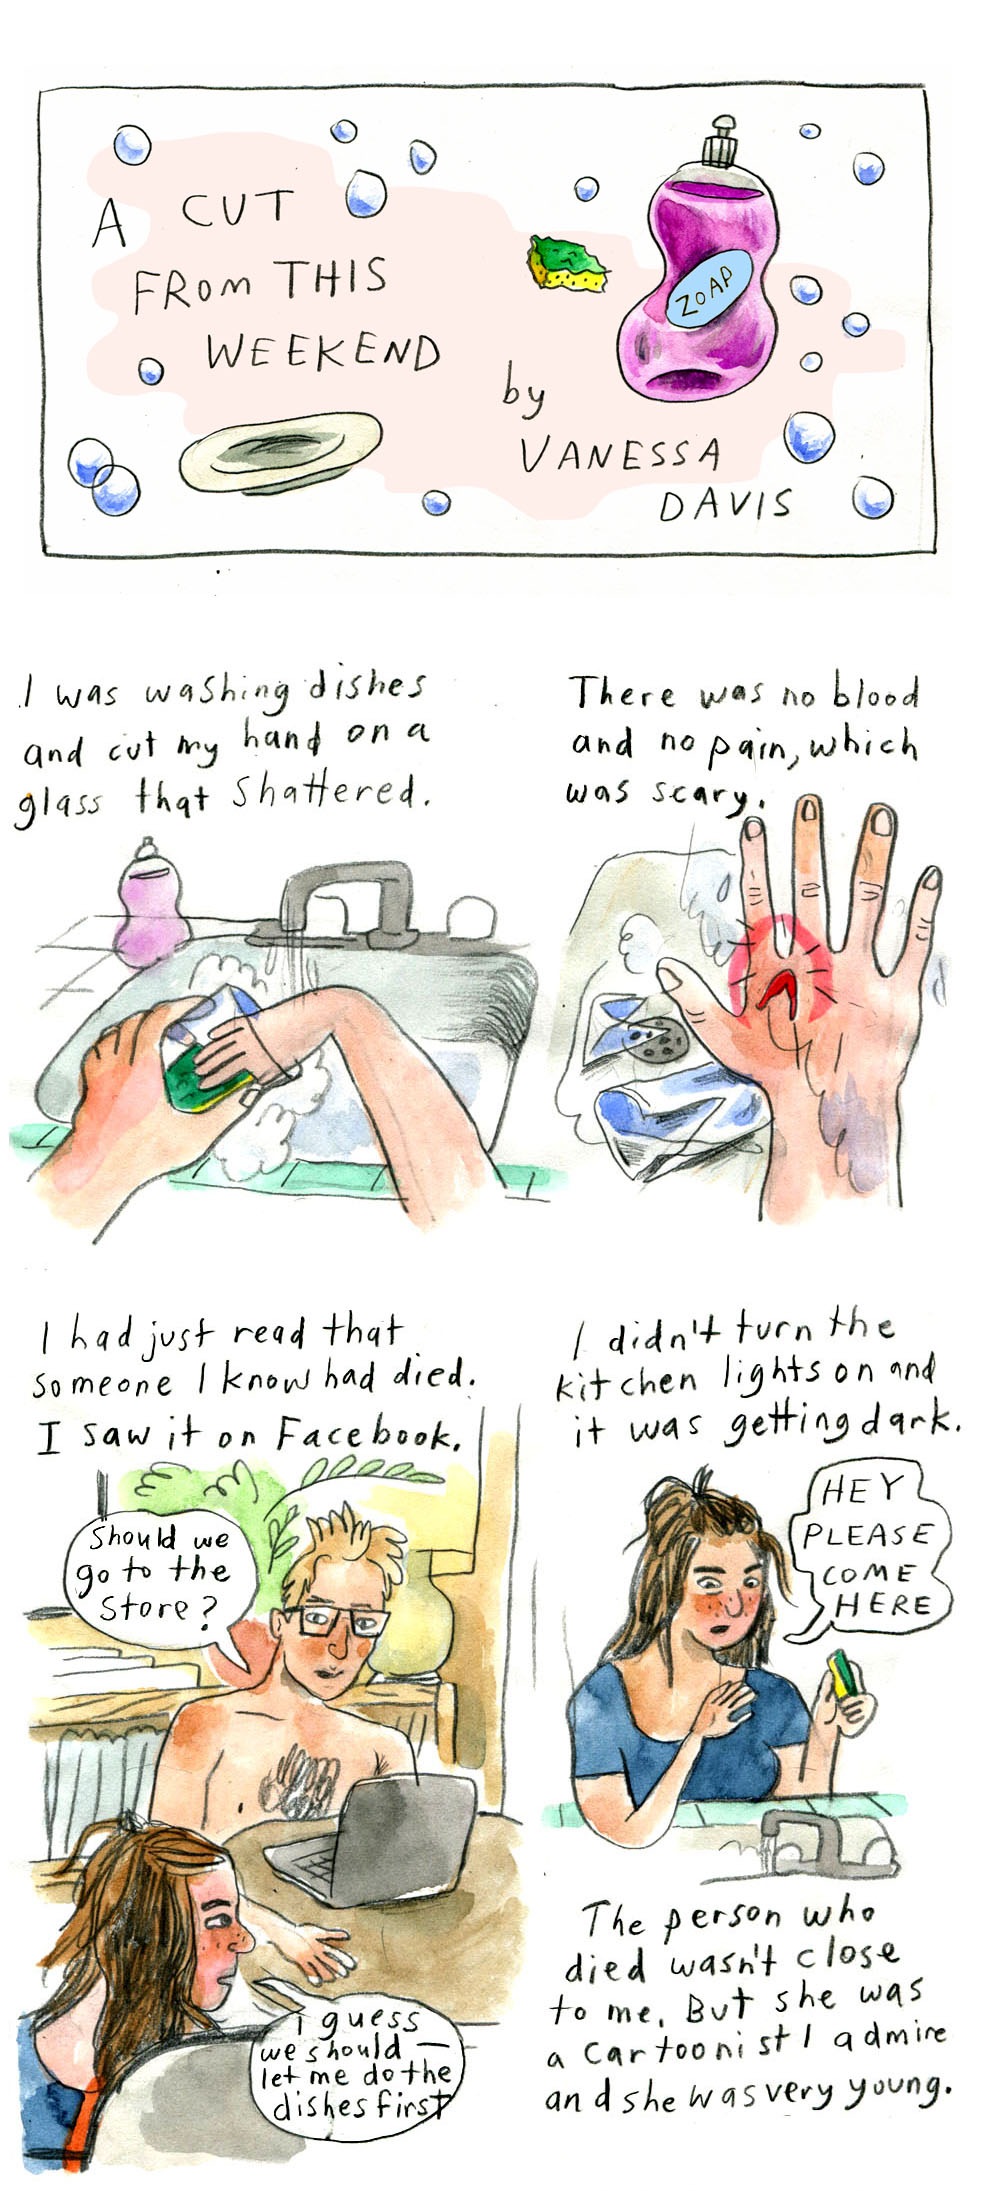 The title panel, "A cut from this weekend by Vanessa Davis," is embellished by soap bubbles, a plate, a sponge, and dish soap.

The comic is drawn without formal panel borders. It is hand drawn, lettered, and colored in a watercolor style. The characters are illustrated with flushed cheeks. The drawings are playful and lively.

Panel by panel description:
1. "I was washing dishes and cut my hand on a glass that shattered."
Image of hands holding and washing a glass at a kitchen sink.

2. "There was no blood and no pain, which was scary."
Vanessa holds up her right hand, which has a bright red gash surrounded by a glowing red halo. 

3. "I had just read that someone I know had died. I saw it on Facebook."
Vanessa's partner, a man with short blond hair and glasses, sits shirtless at a table with a laptop in front of him. Looking at Vanessa, he says, "Should we go to the store?"
Vanessa, red-faced, hair half-up and half-down and wearing a blue shirt, turns to the side, not looking at him. She replies, "I guess we shouldâ€”let me do the dishes first"

3. "I didn't turn the kitchen lights on and it was getting dark
Vanessa stands at the sink, looking down at her right hand, sponge in her left. She looks a bit surprised and solemn. She says, "Hey please come here"
Narration continues, "The person who died wasn't close to me. But she was a cartoonist I admire and she was very young."